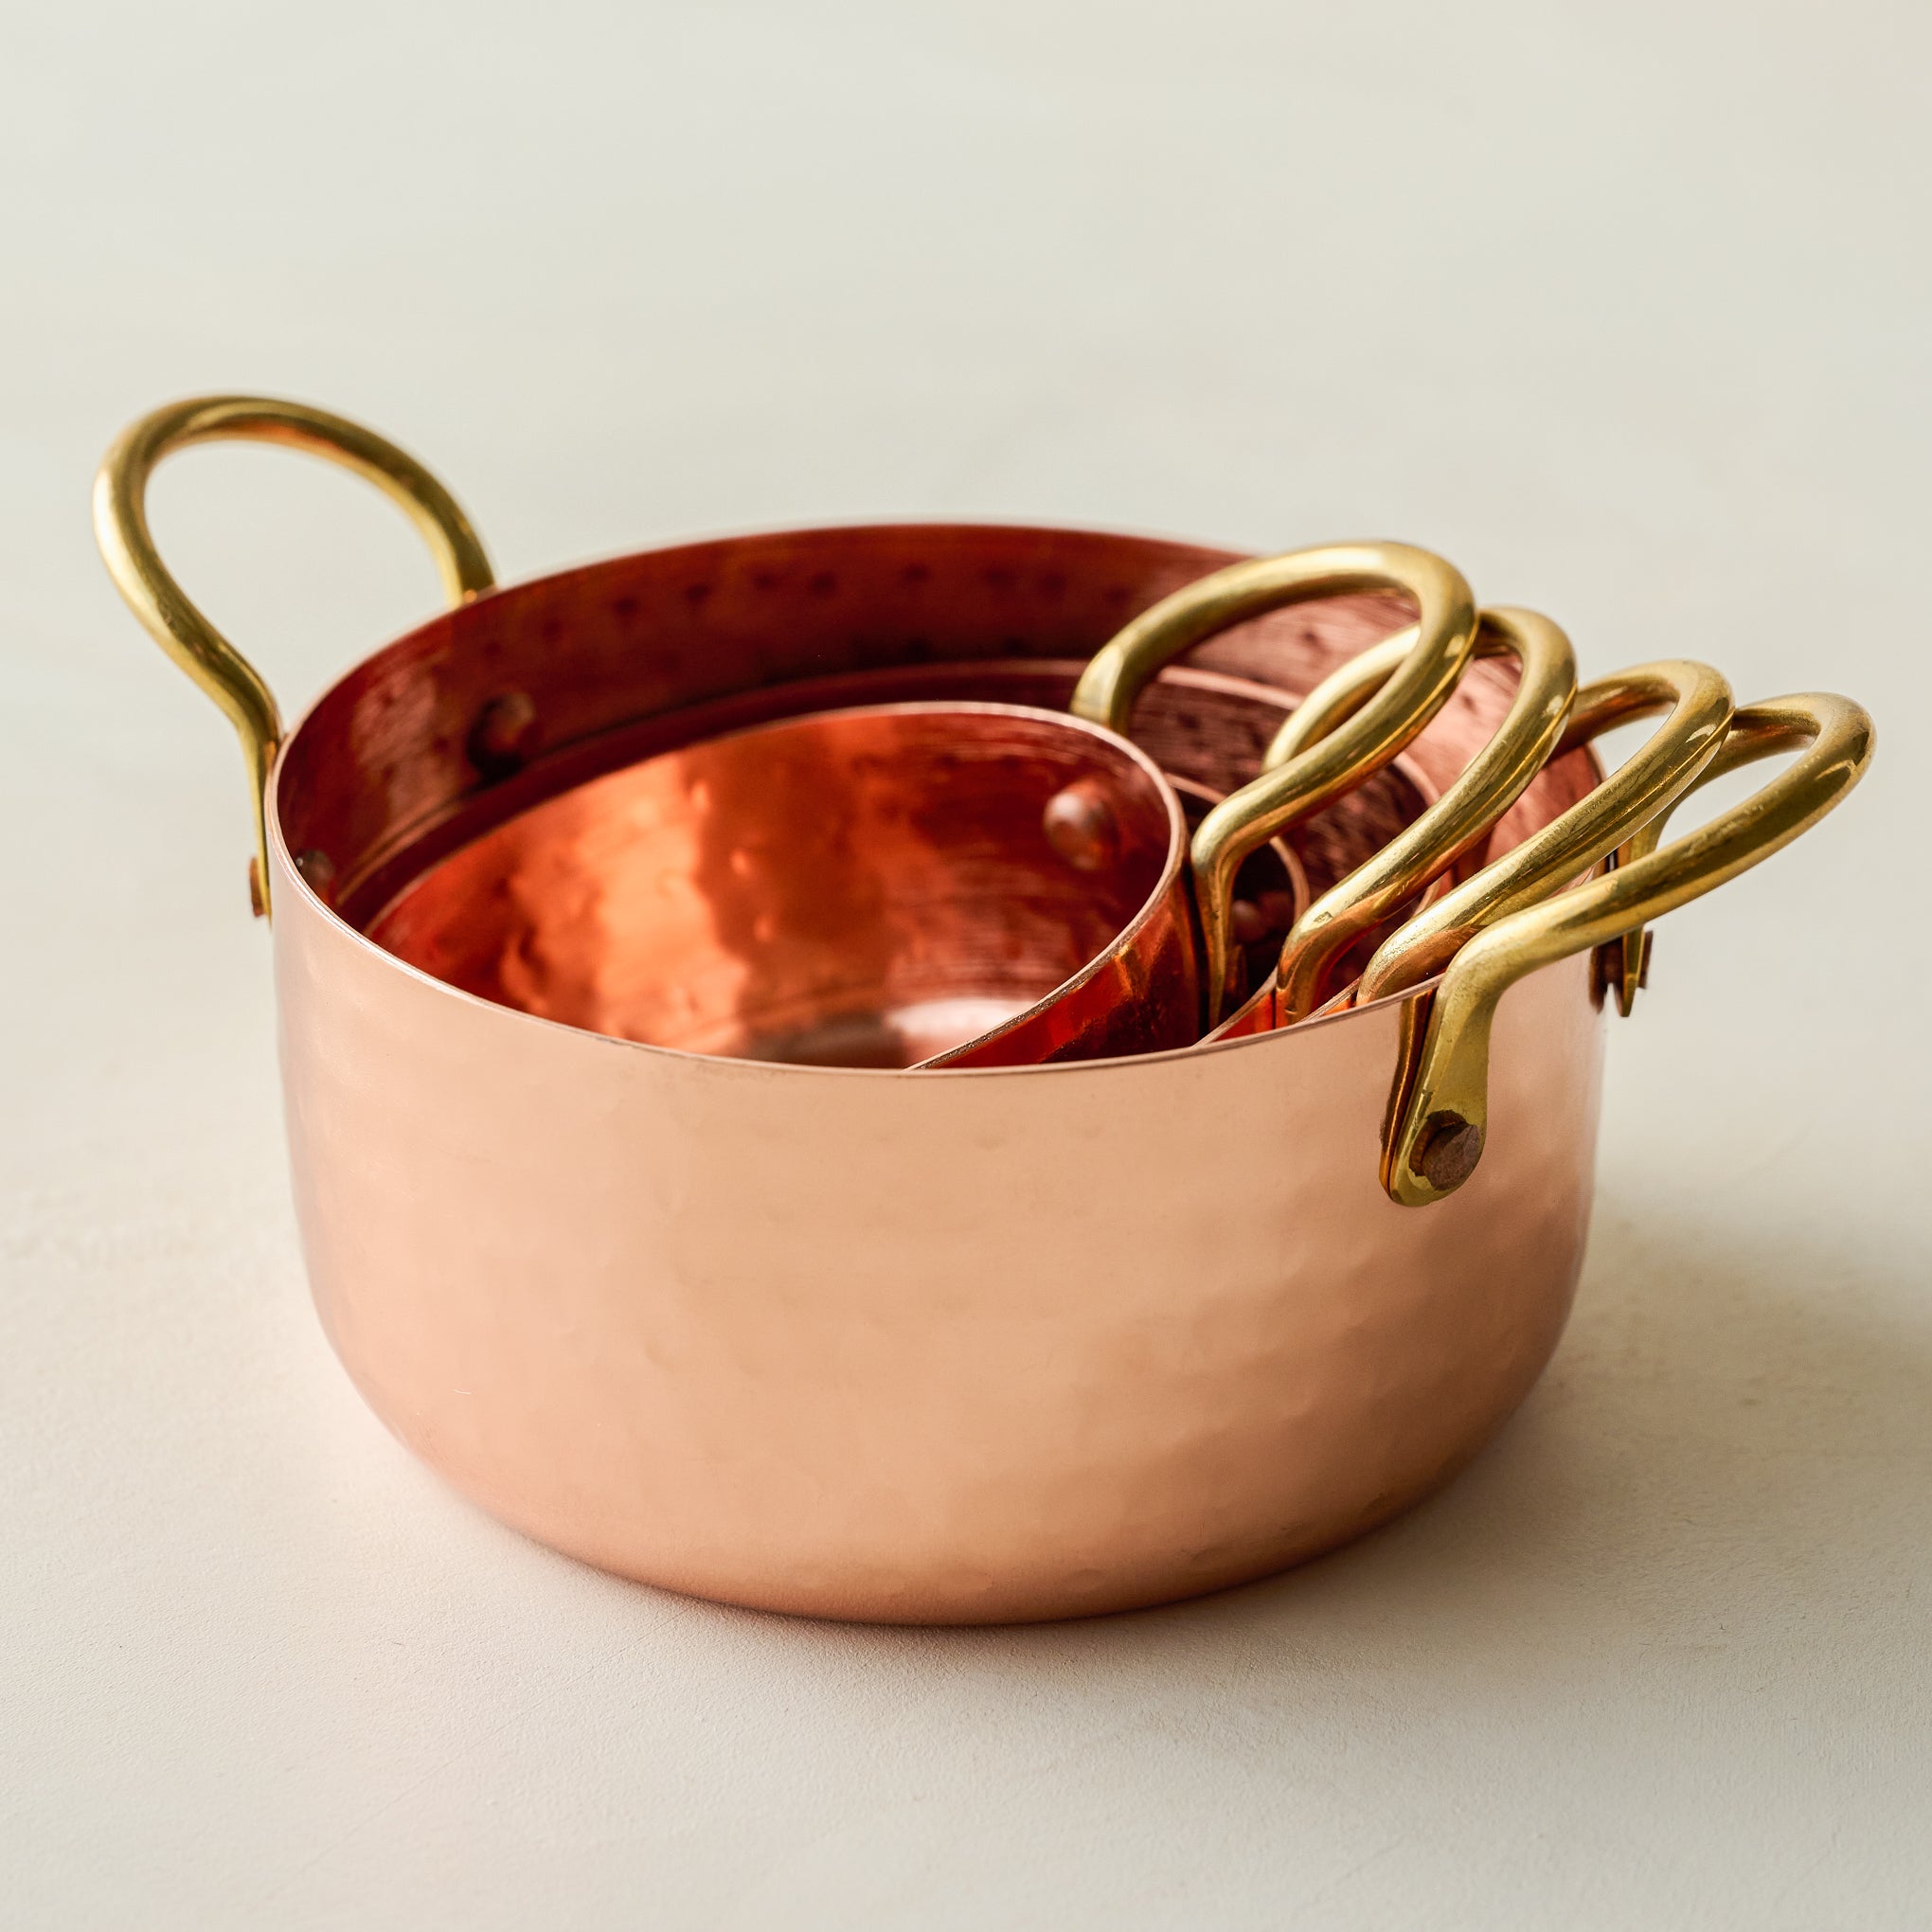 Dropship Rose Gold Measuring Cups And Spoons Set, Copper Pink